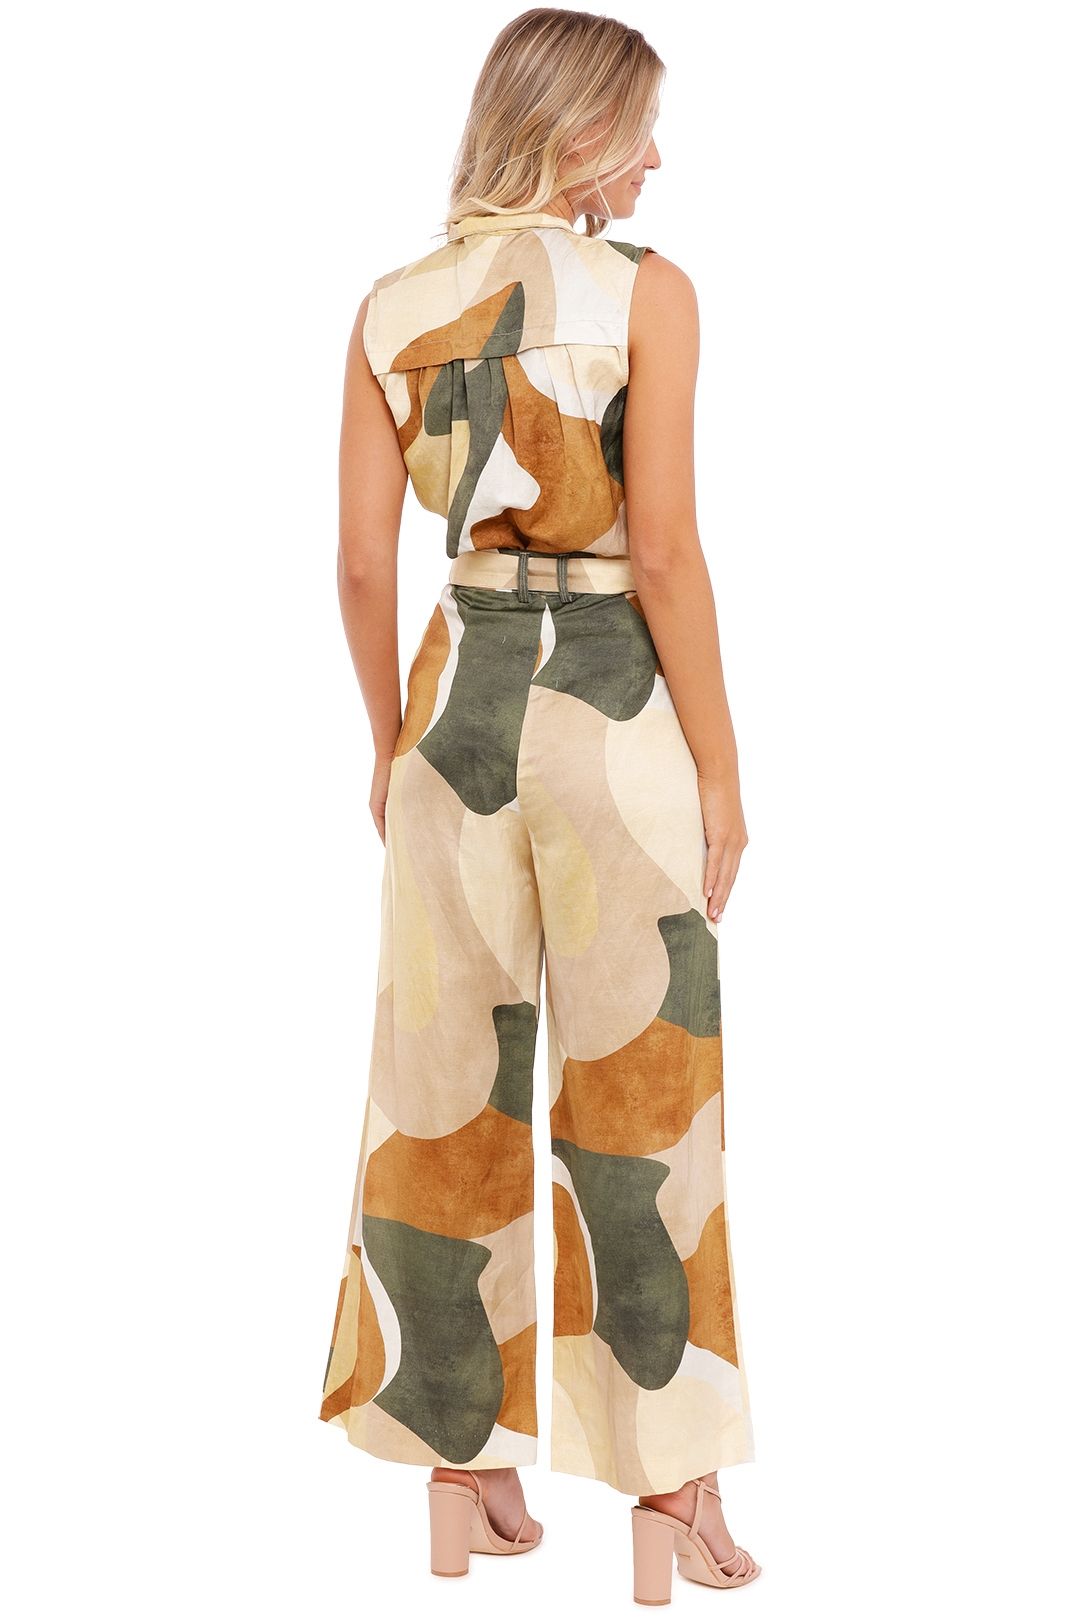 Ministry of Style Retro Resort Sleeveless Blouse Abstract Print